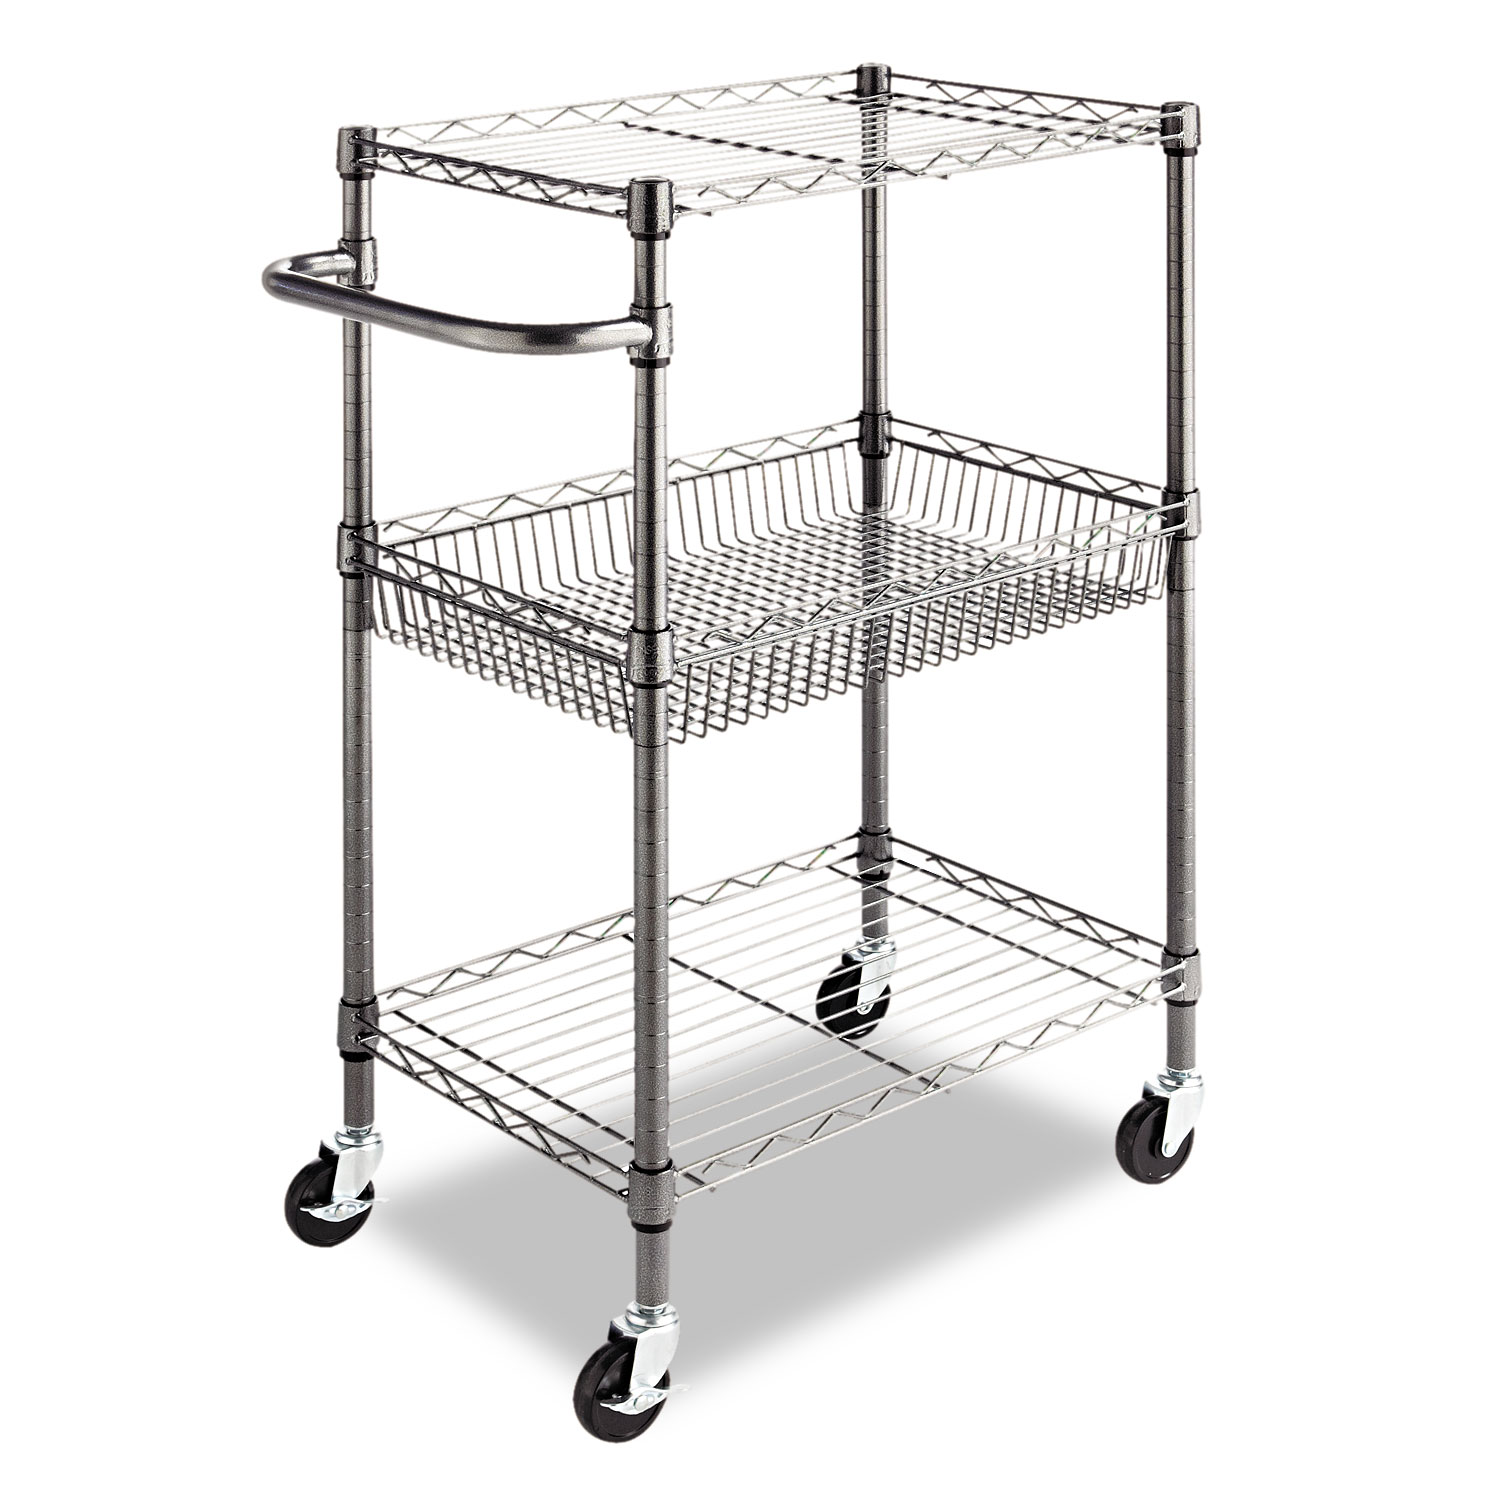 Three-Tier Wire Cart with Basket, Metal, 2 Shelves, 1 Bin, 500 lb Capacity,  28 x 16 x 39, Black Anthracite - Office Express Office Products